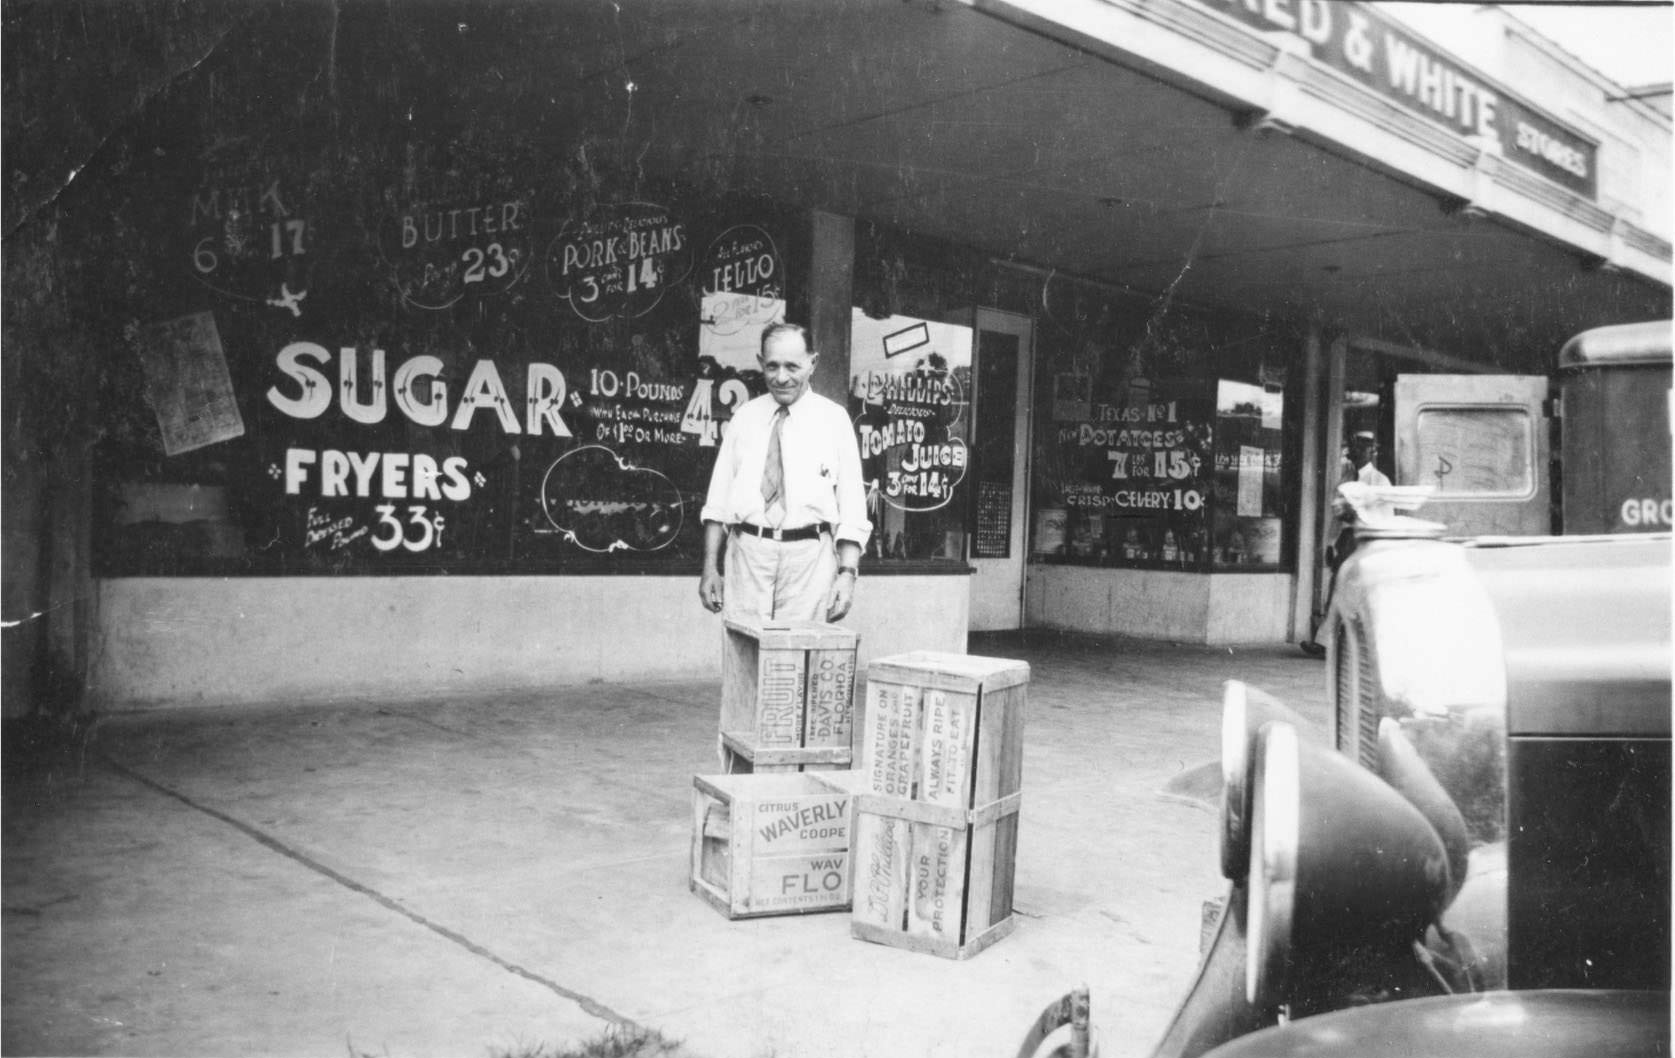 Man in front of a store with wooden crates and car in foreground.